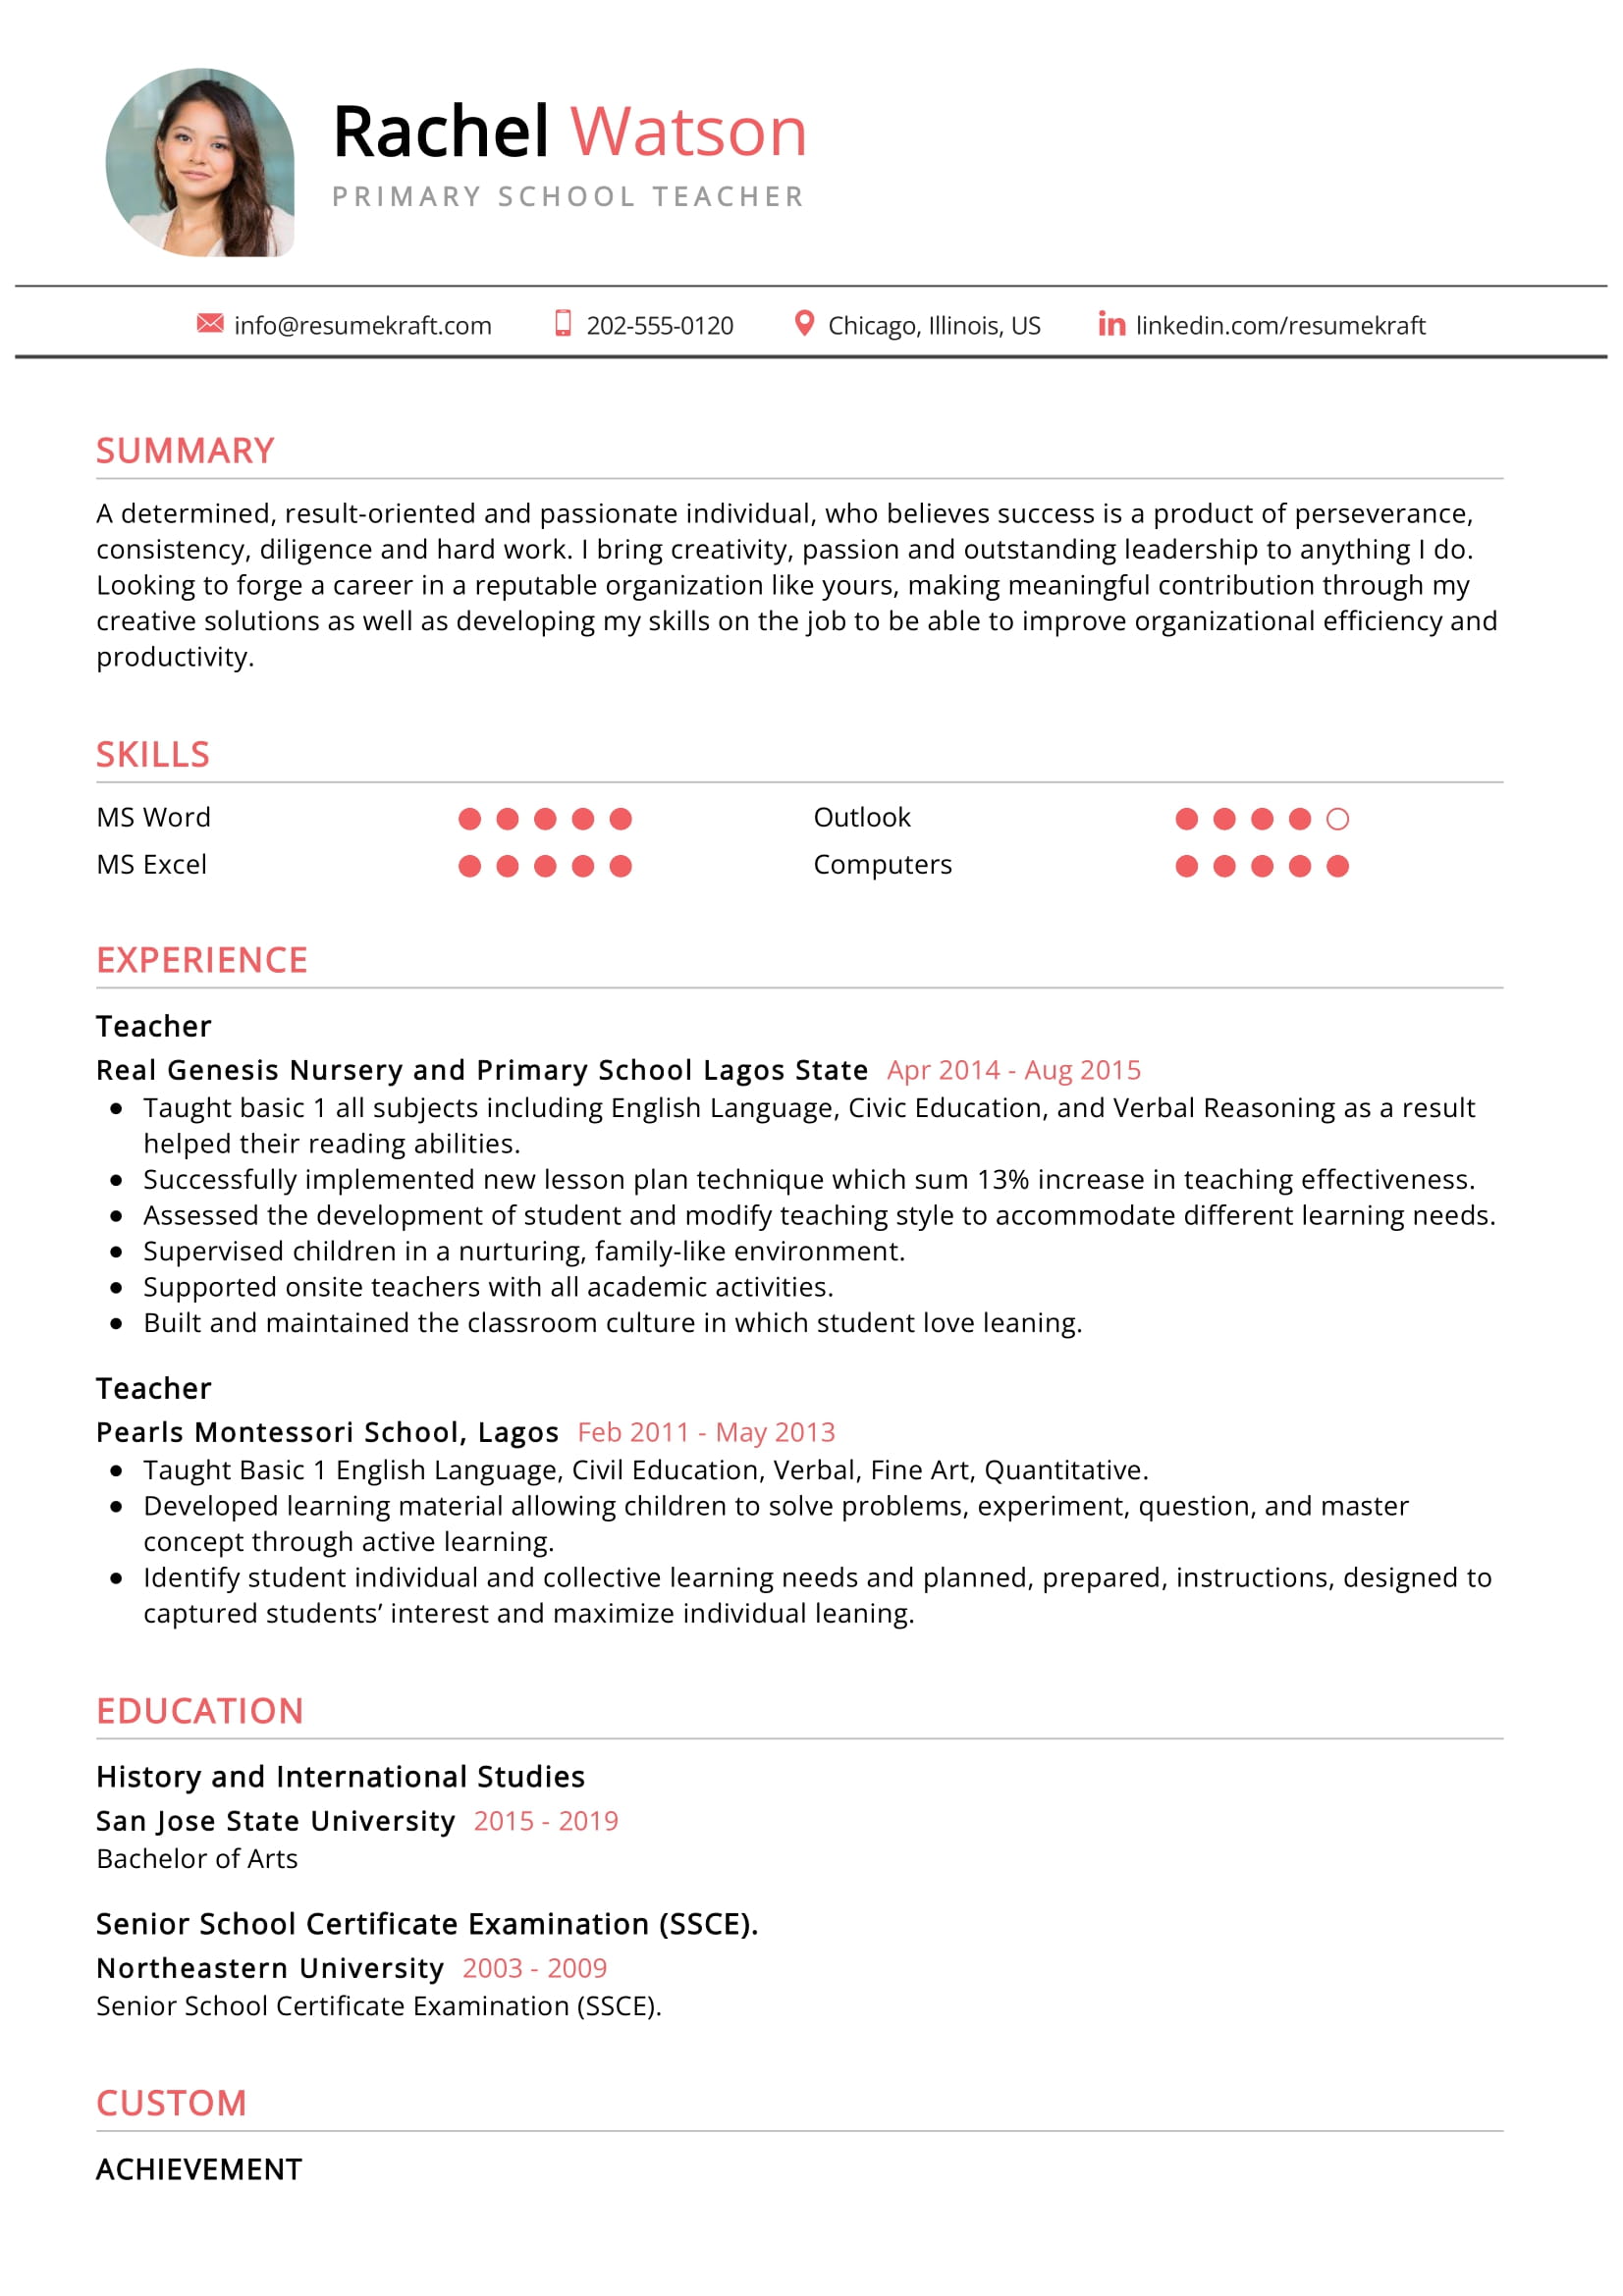 writing a resume for primary school teacher